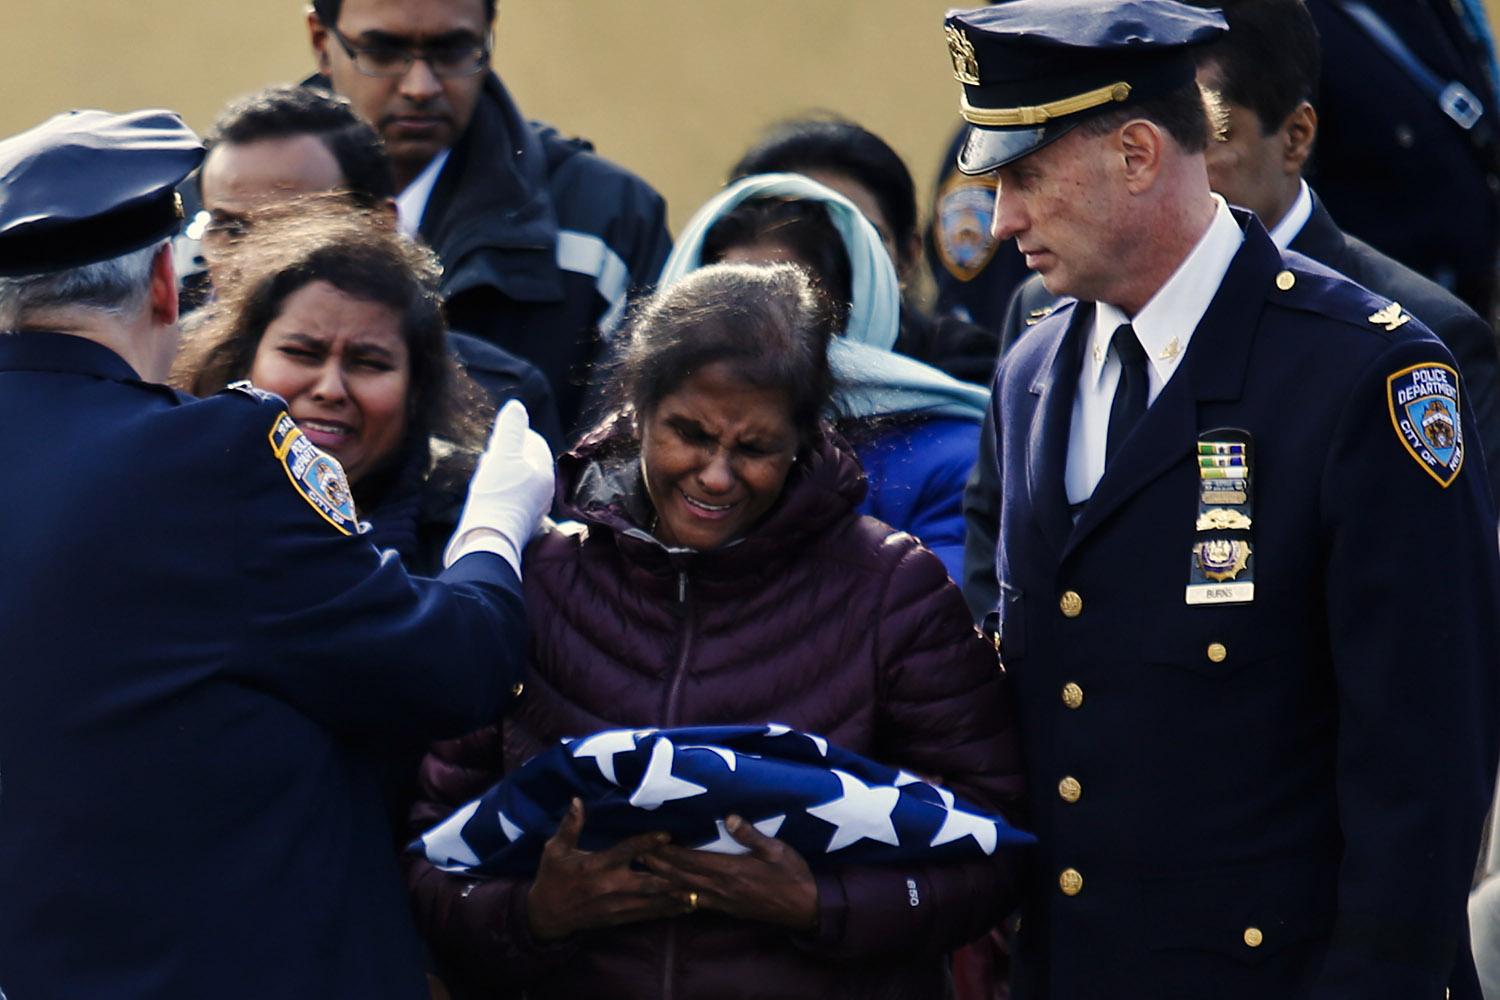 Dammika cries after receiving the flag that covered the casket of her husband during his wake service in New York